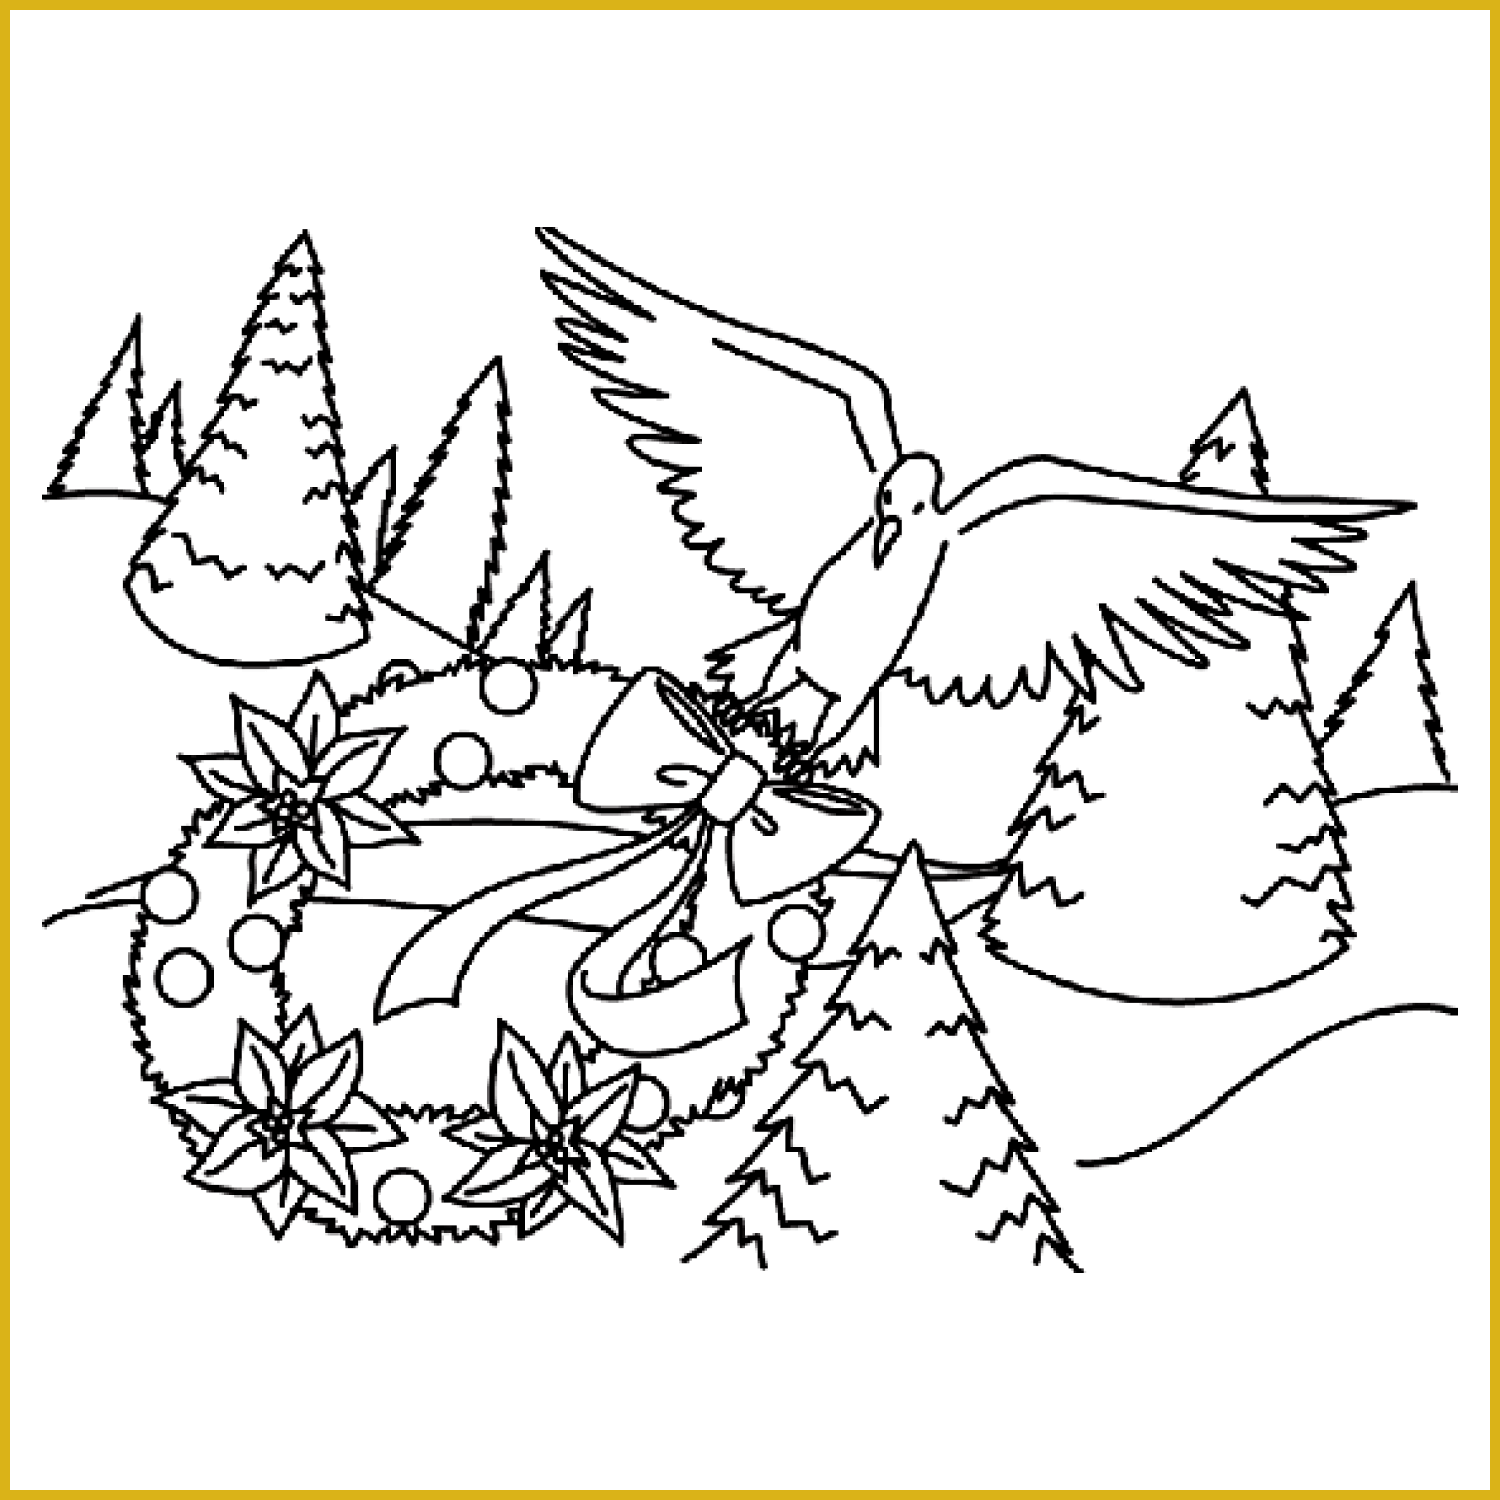 winter warmth coloring page cover image.